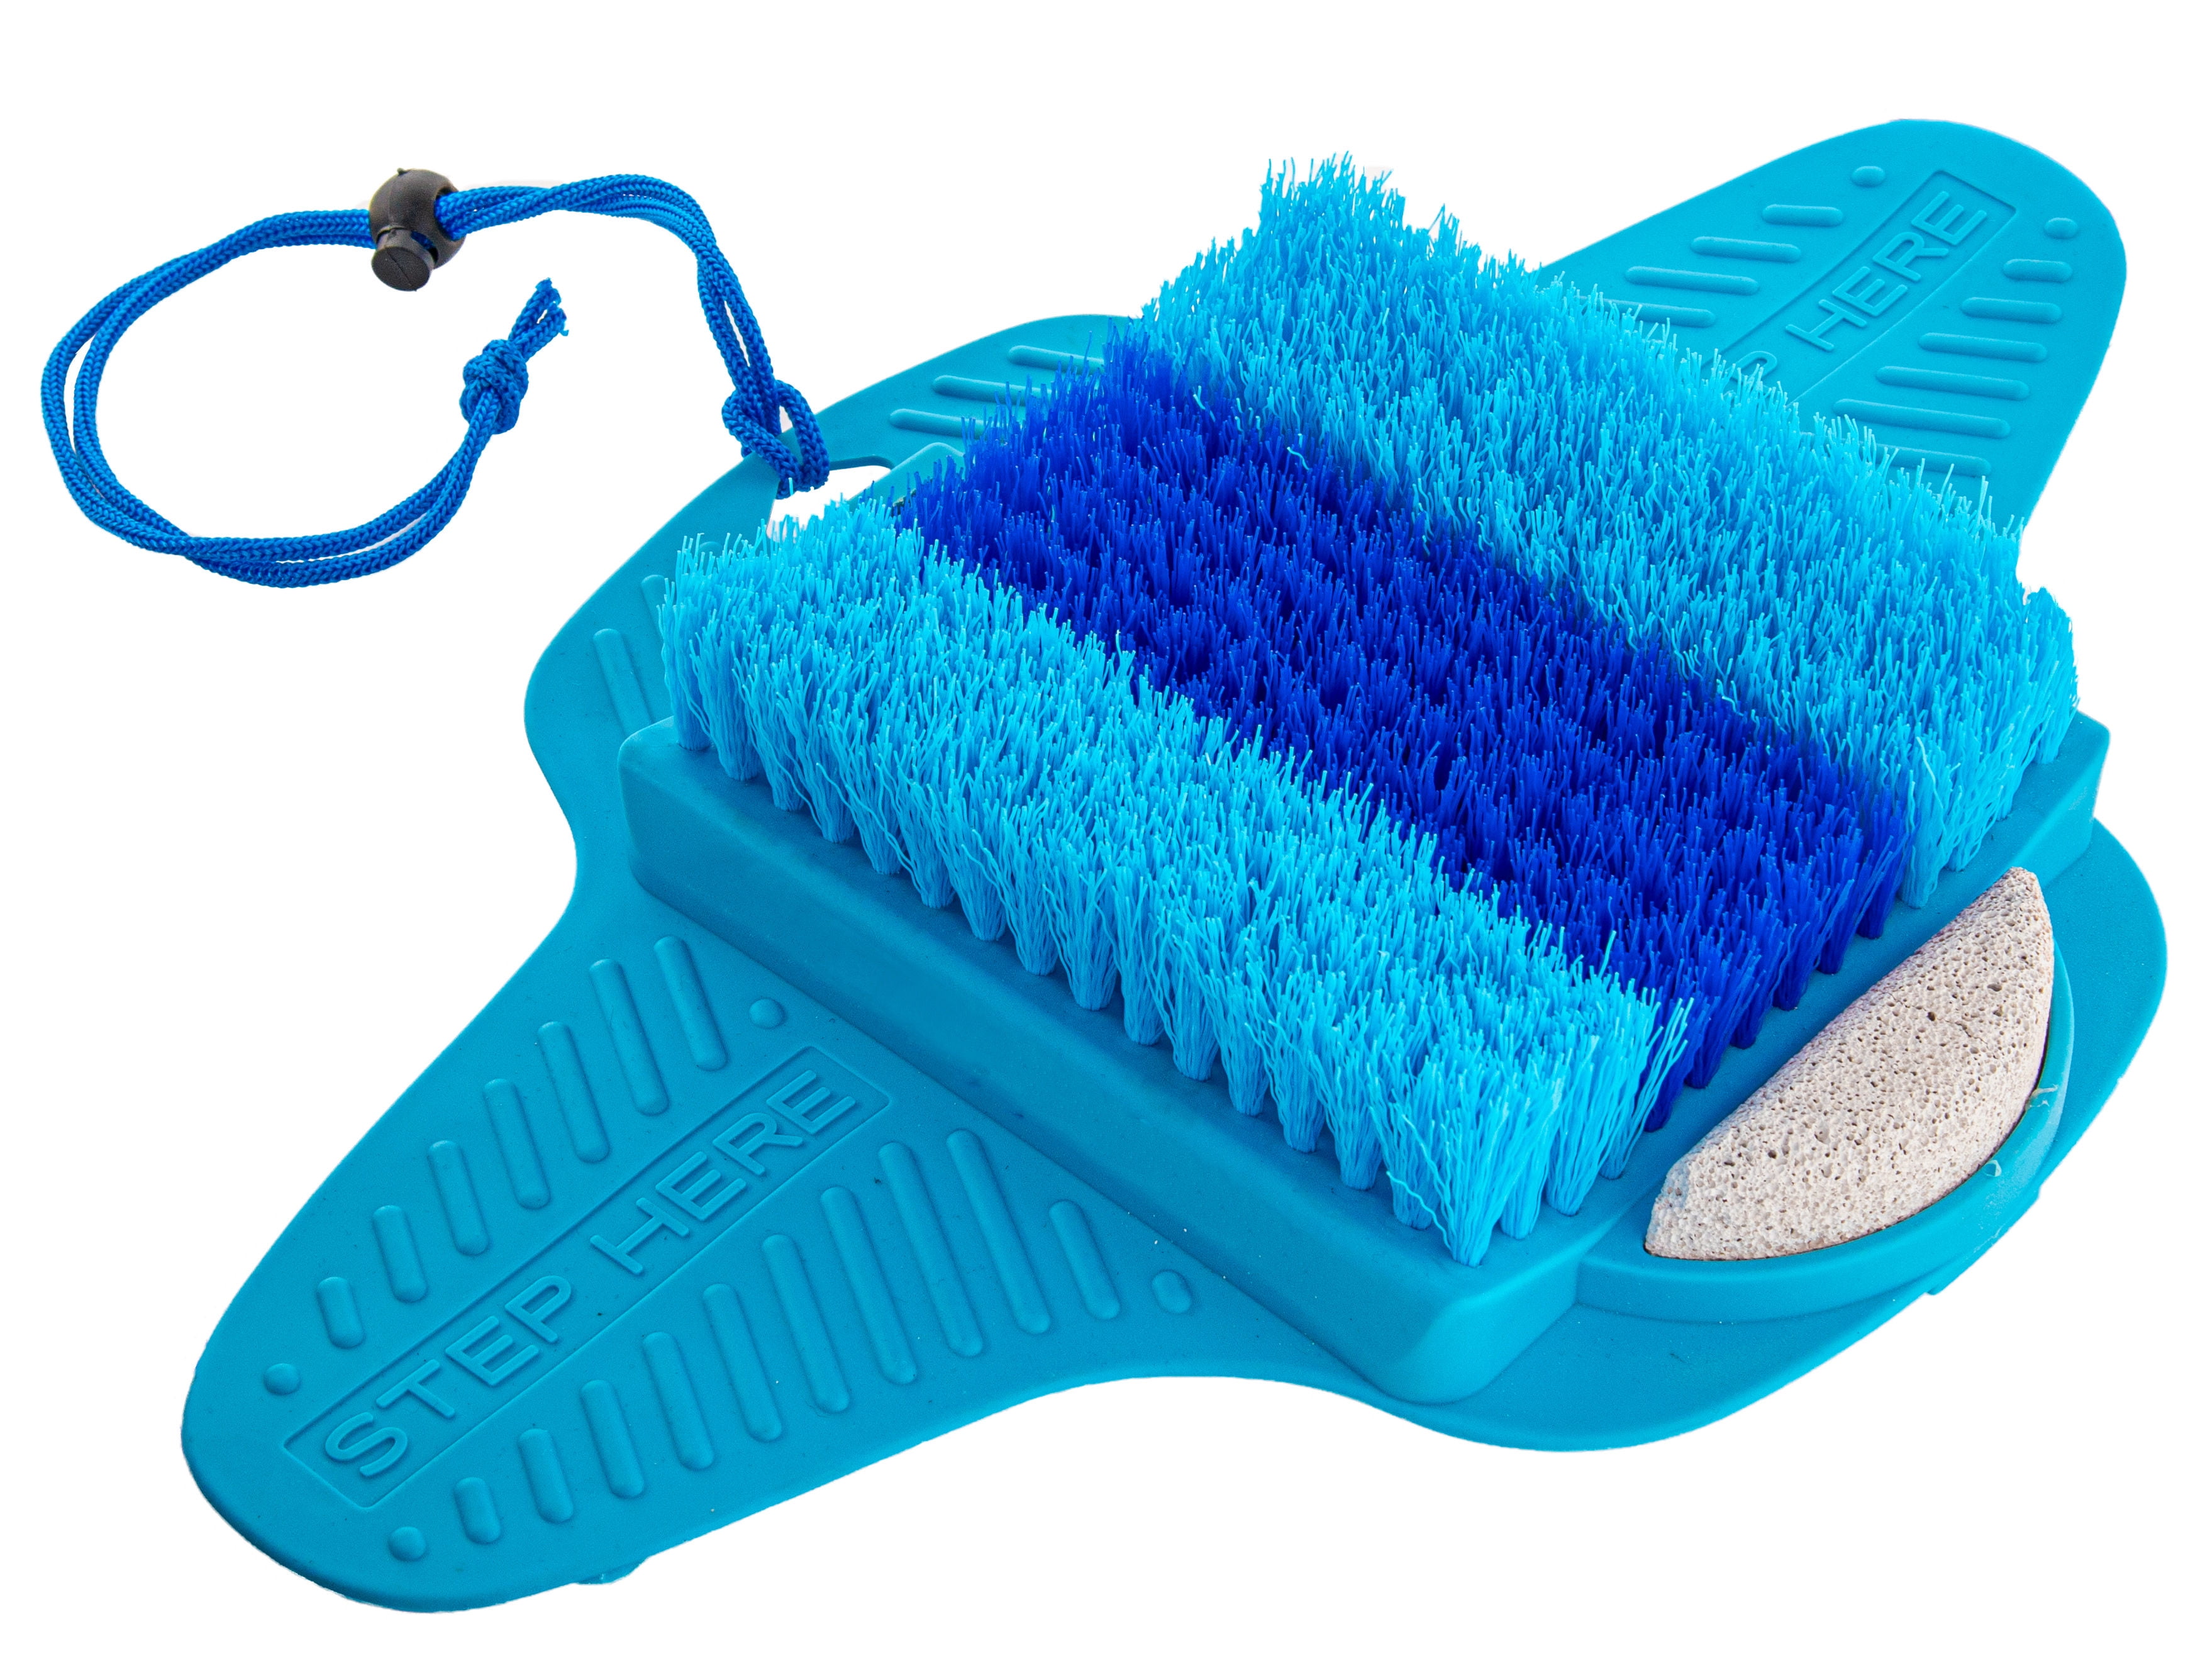  Seinohome Foot and Back Scrubber,Shower Foot & Back